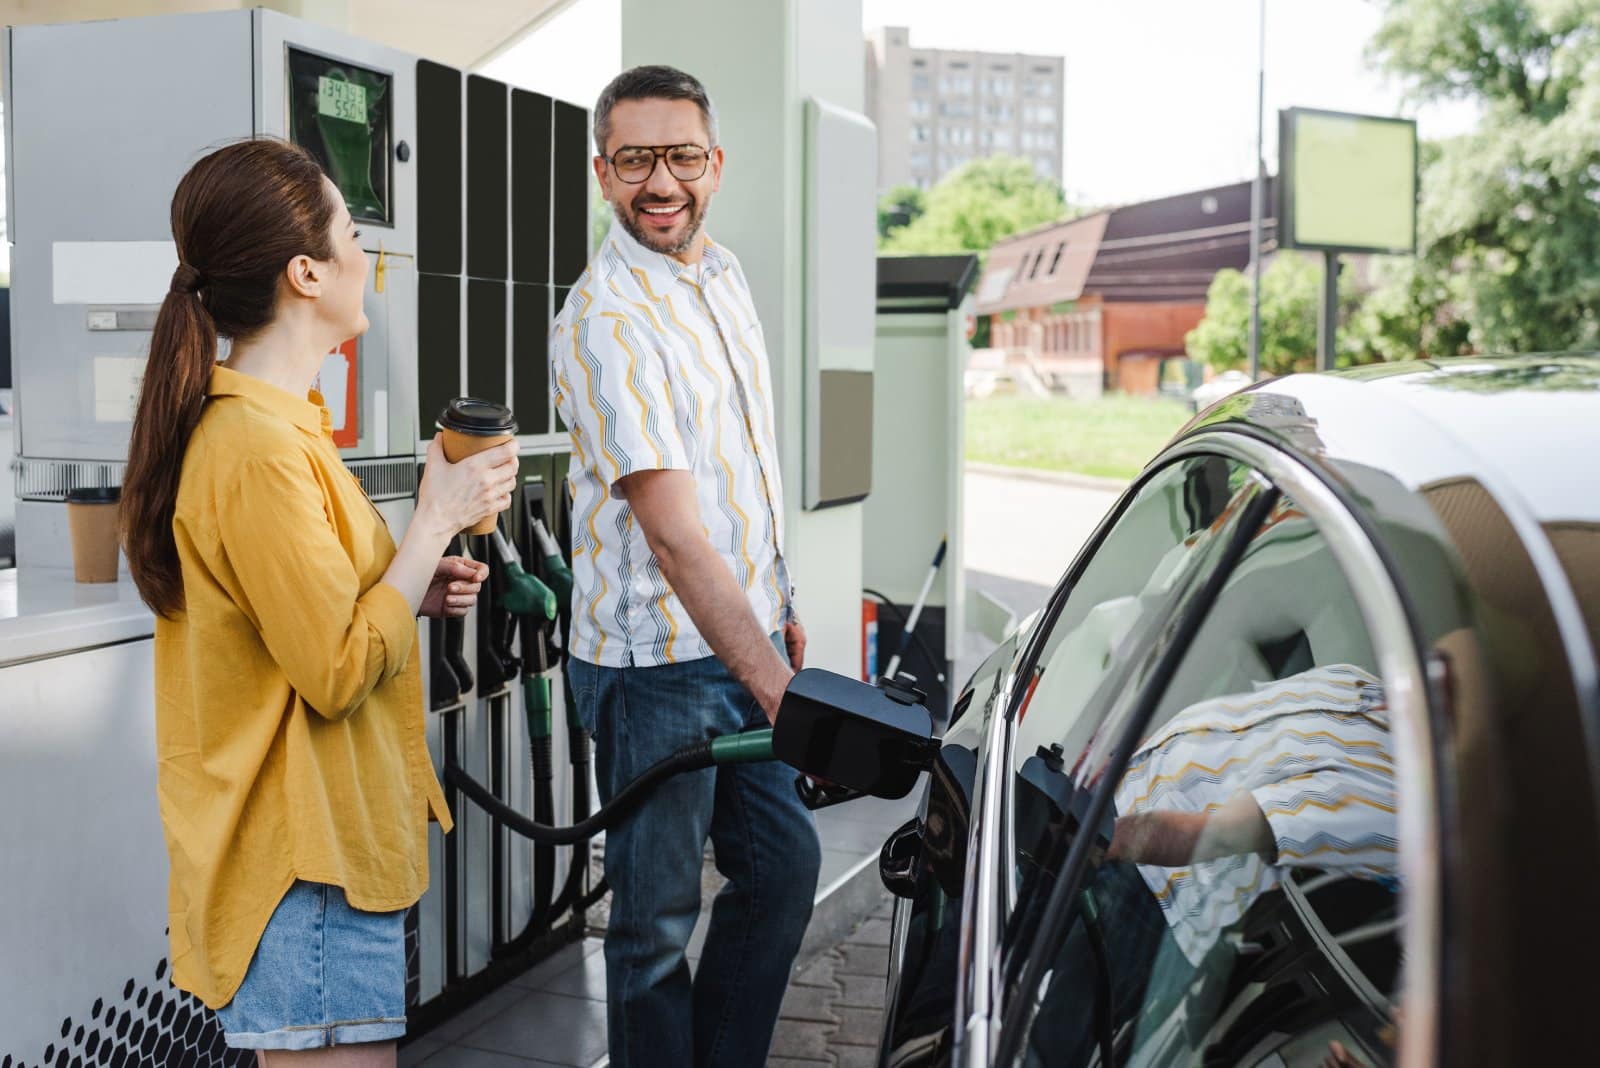 Image Credit: Shutterstock / LightField Studios <p>Fill up too often, and it’s money down the drain. Run low on gas, and it’s a nerve-wracking gamble. Fuel management is never in the green.</p>